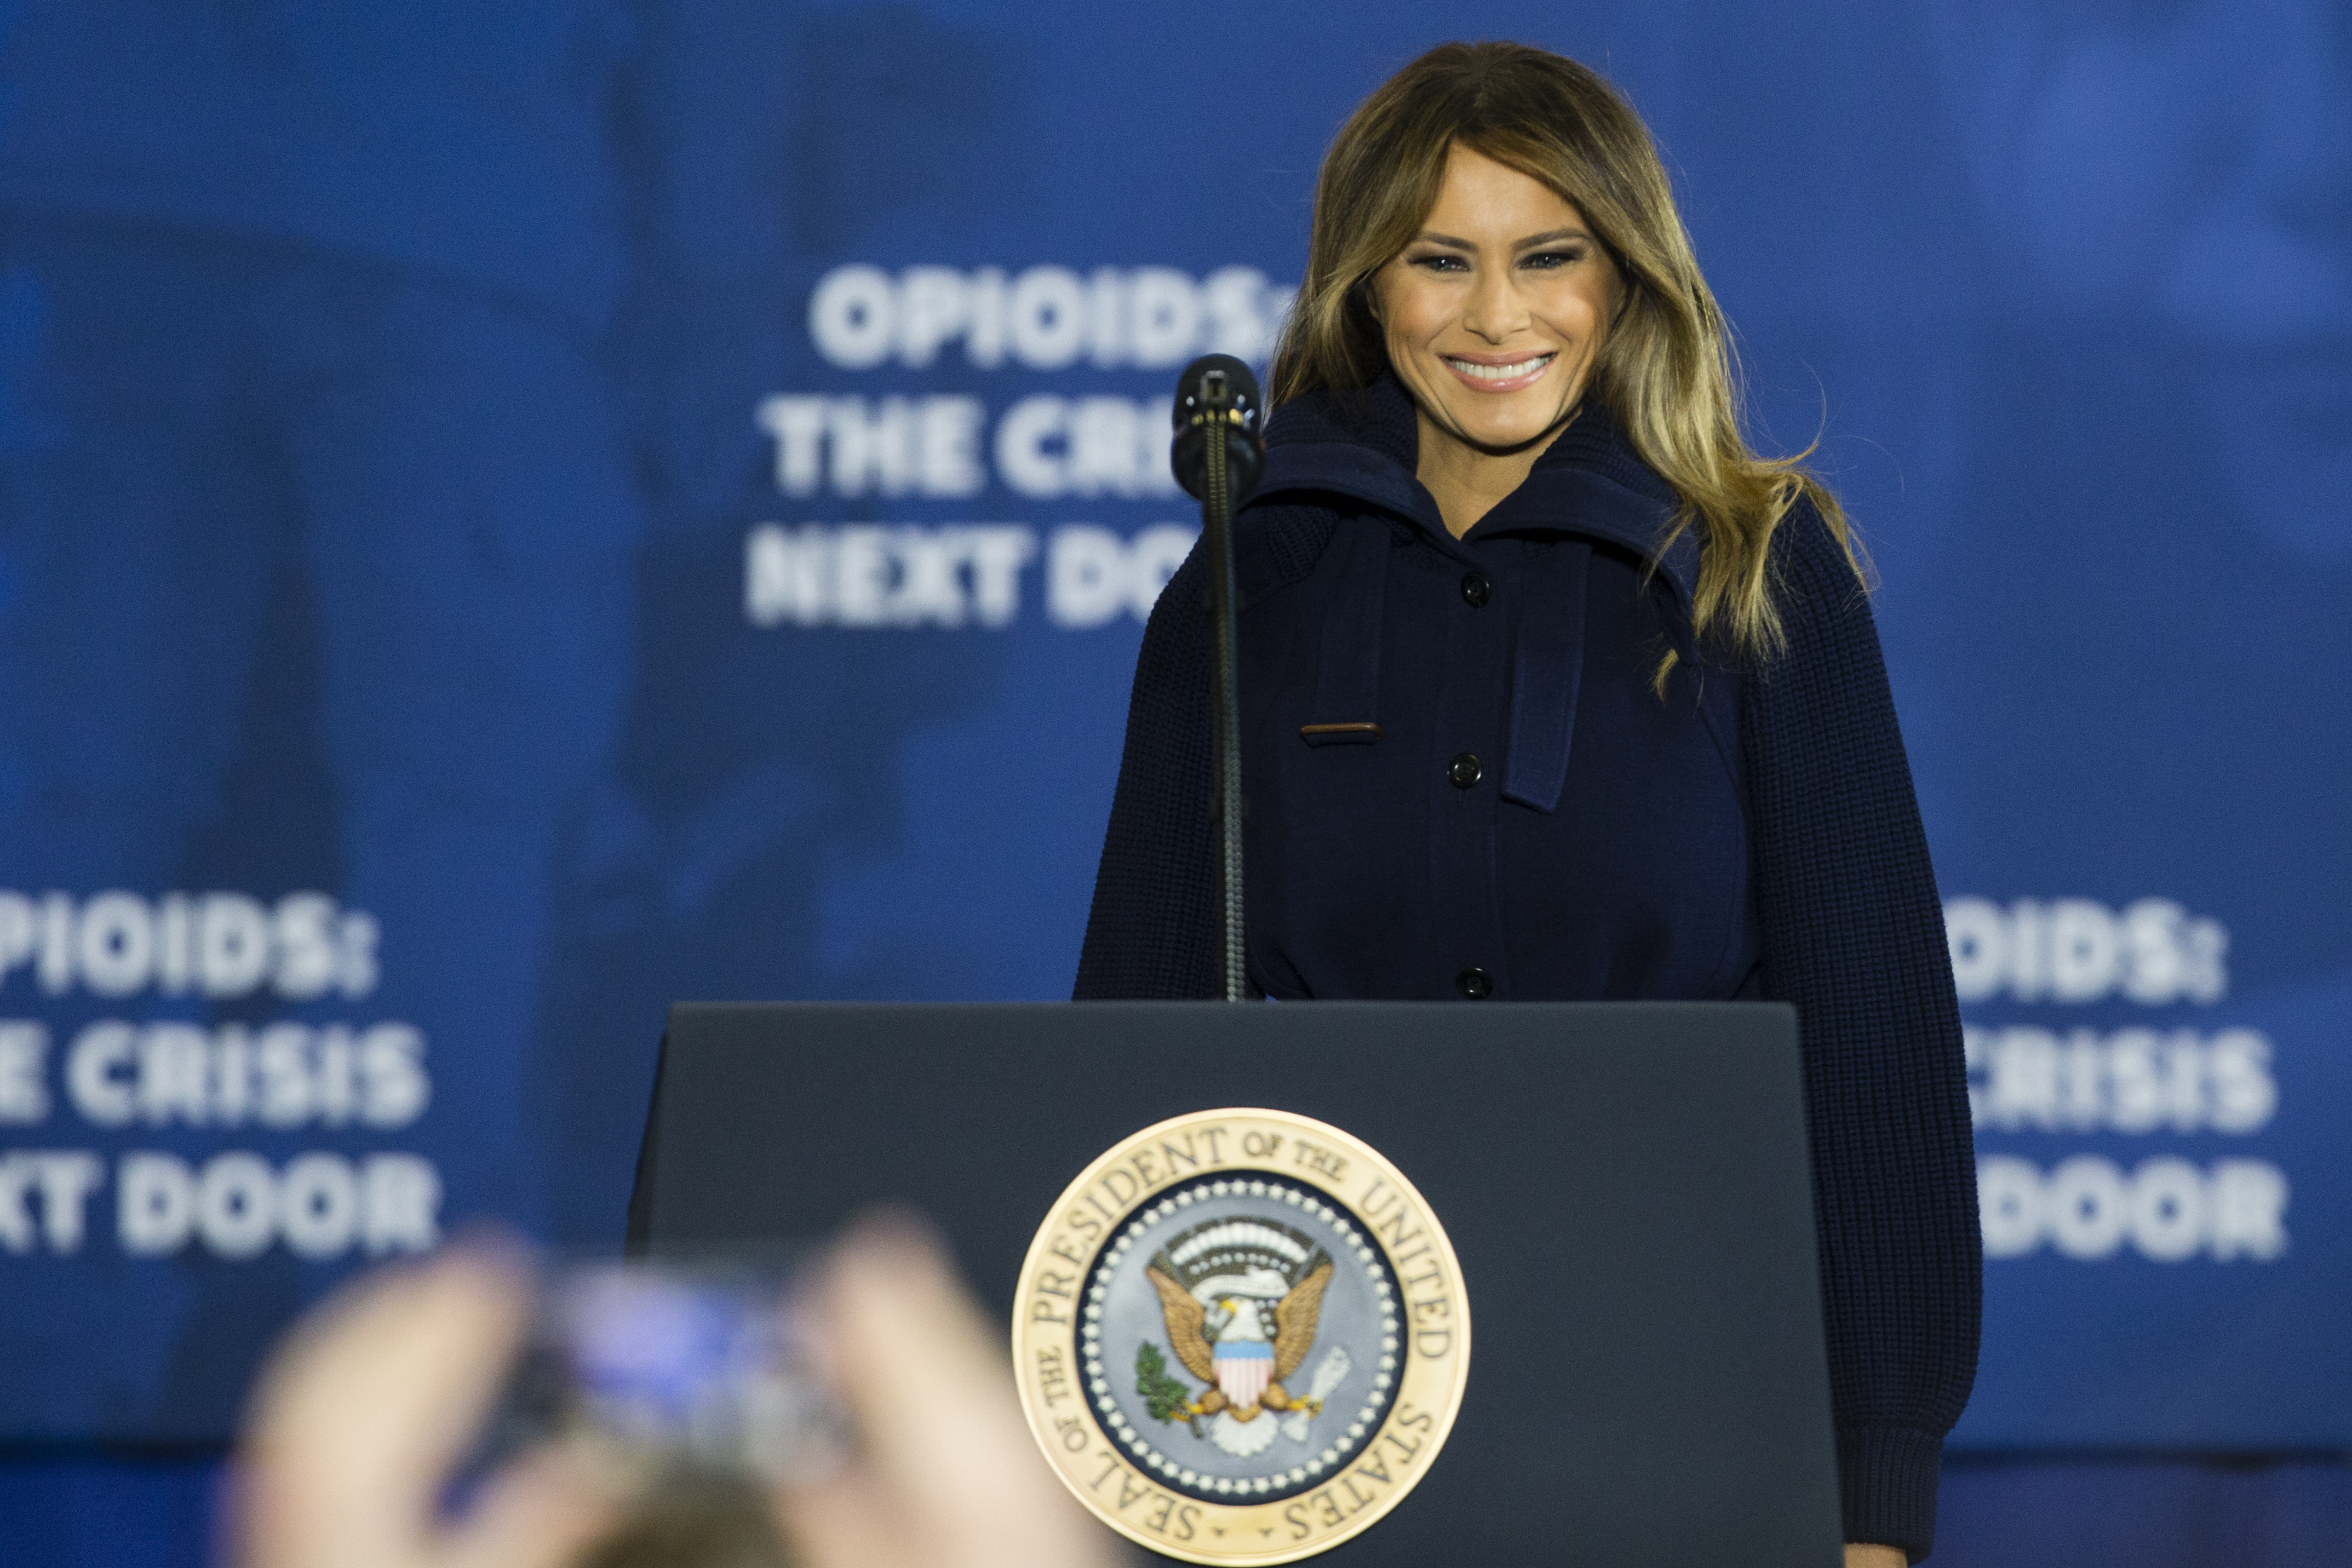 First Lady Melania Trump introduces President Donald Trump for a speech on his administration's plans to combat the opioid crisis at Manchester Community College in Manchester, NH on March 19, 2018. (Keith Bedford—Boston Globe/Getty Images)